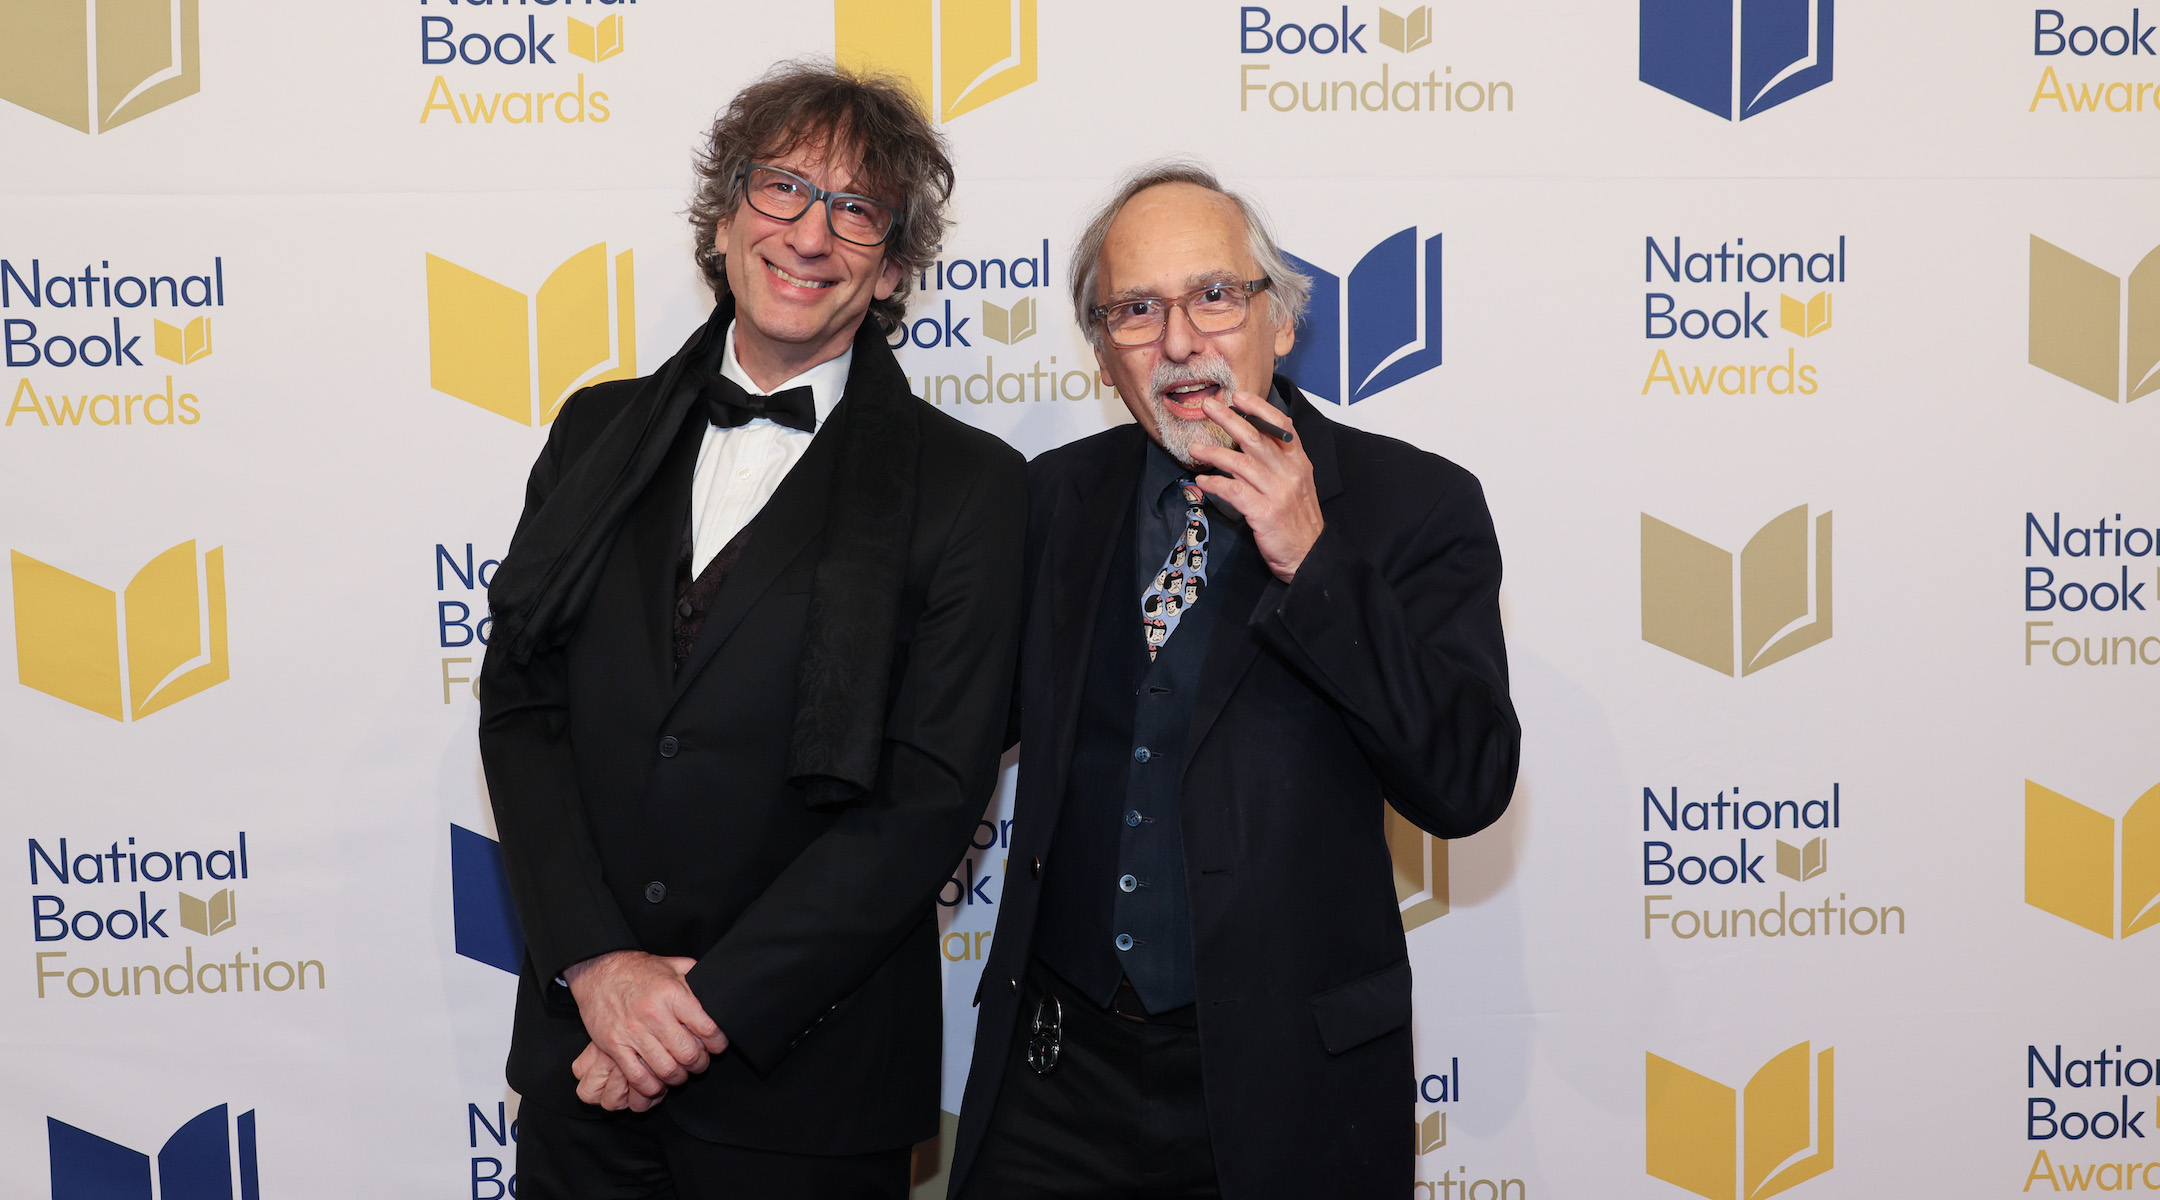 Neil Gaiman and Art Spiegelman attend the 73rd National Book Awards at Cipriani Wall Street on November 16, 2022 in New York City. (Dia Dipasupil/Getty Images)